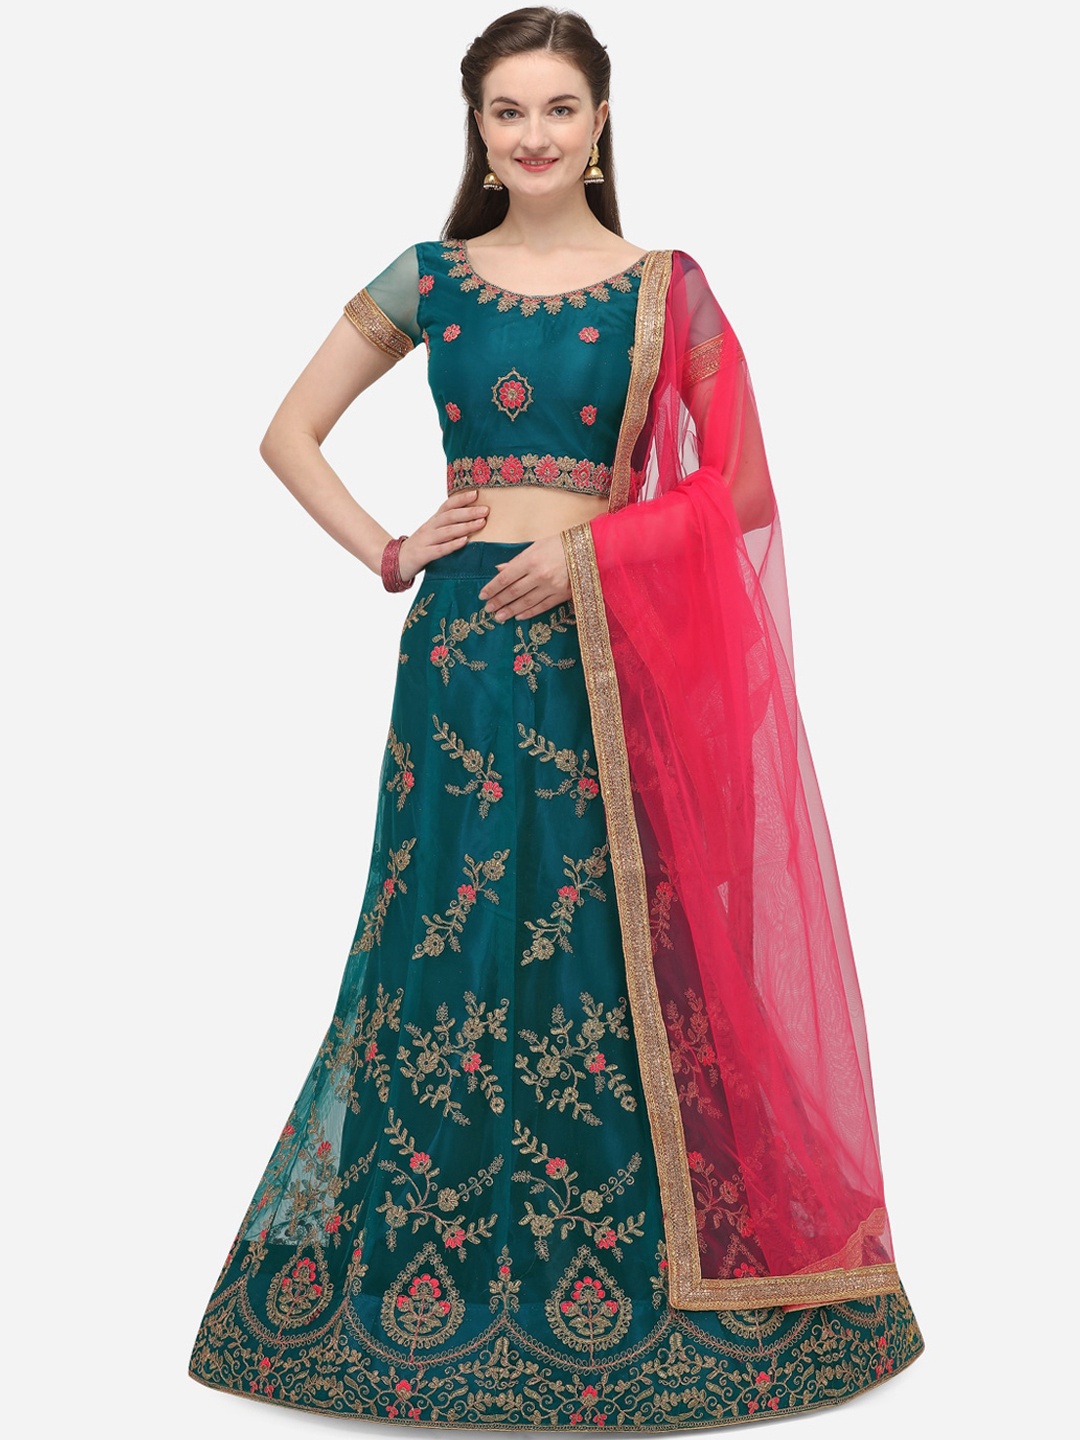 

Netram Teal & Pink Embroidered Semi-Stitched Lehenga & Unstitched Blouse with Dupatta